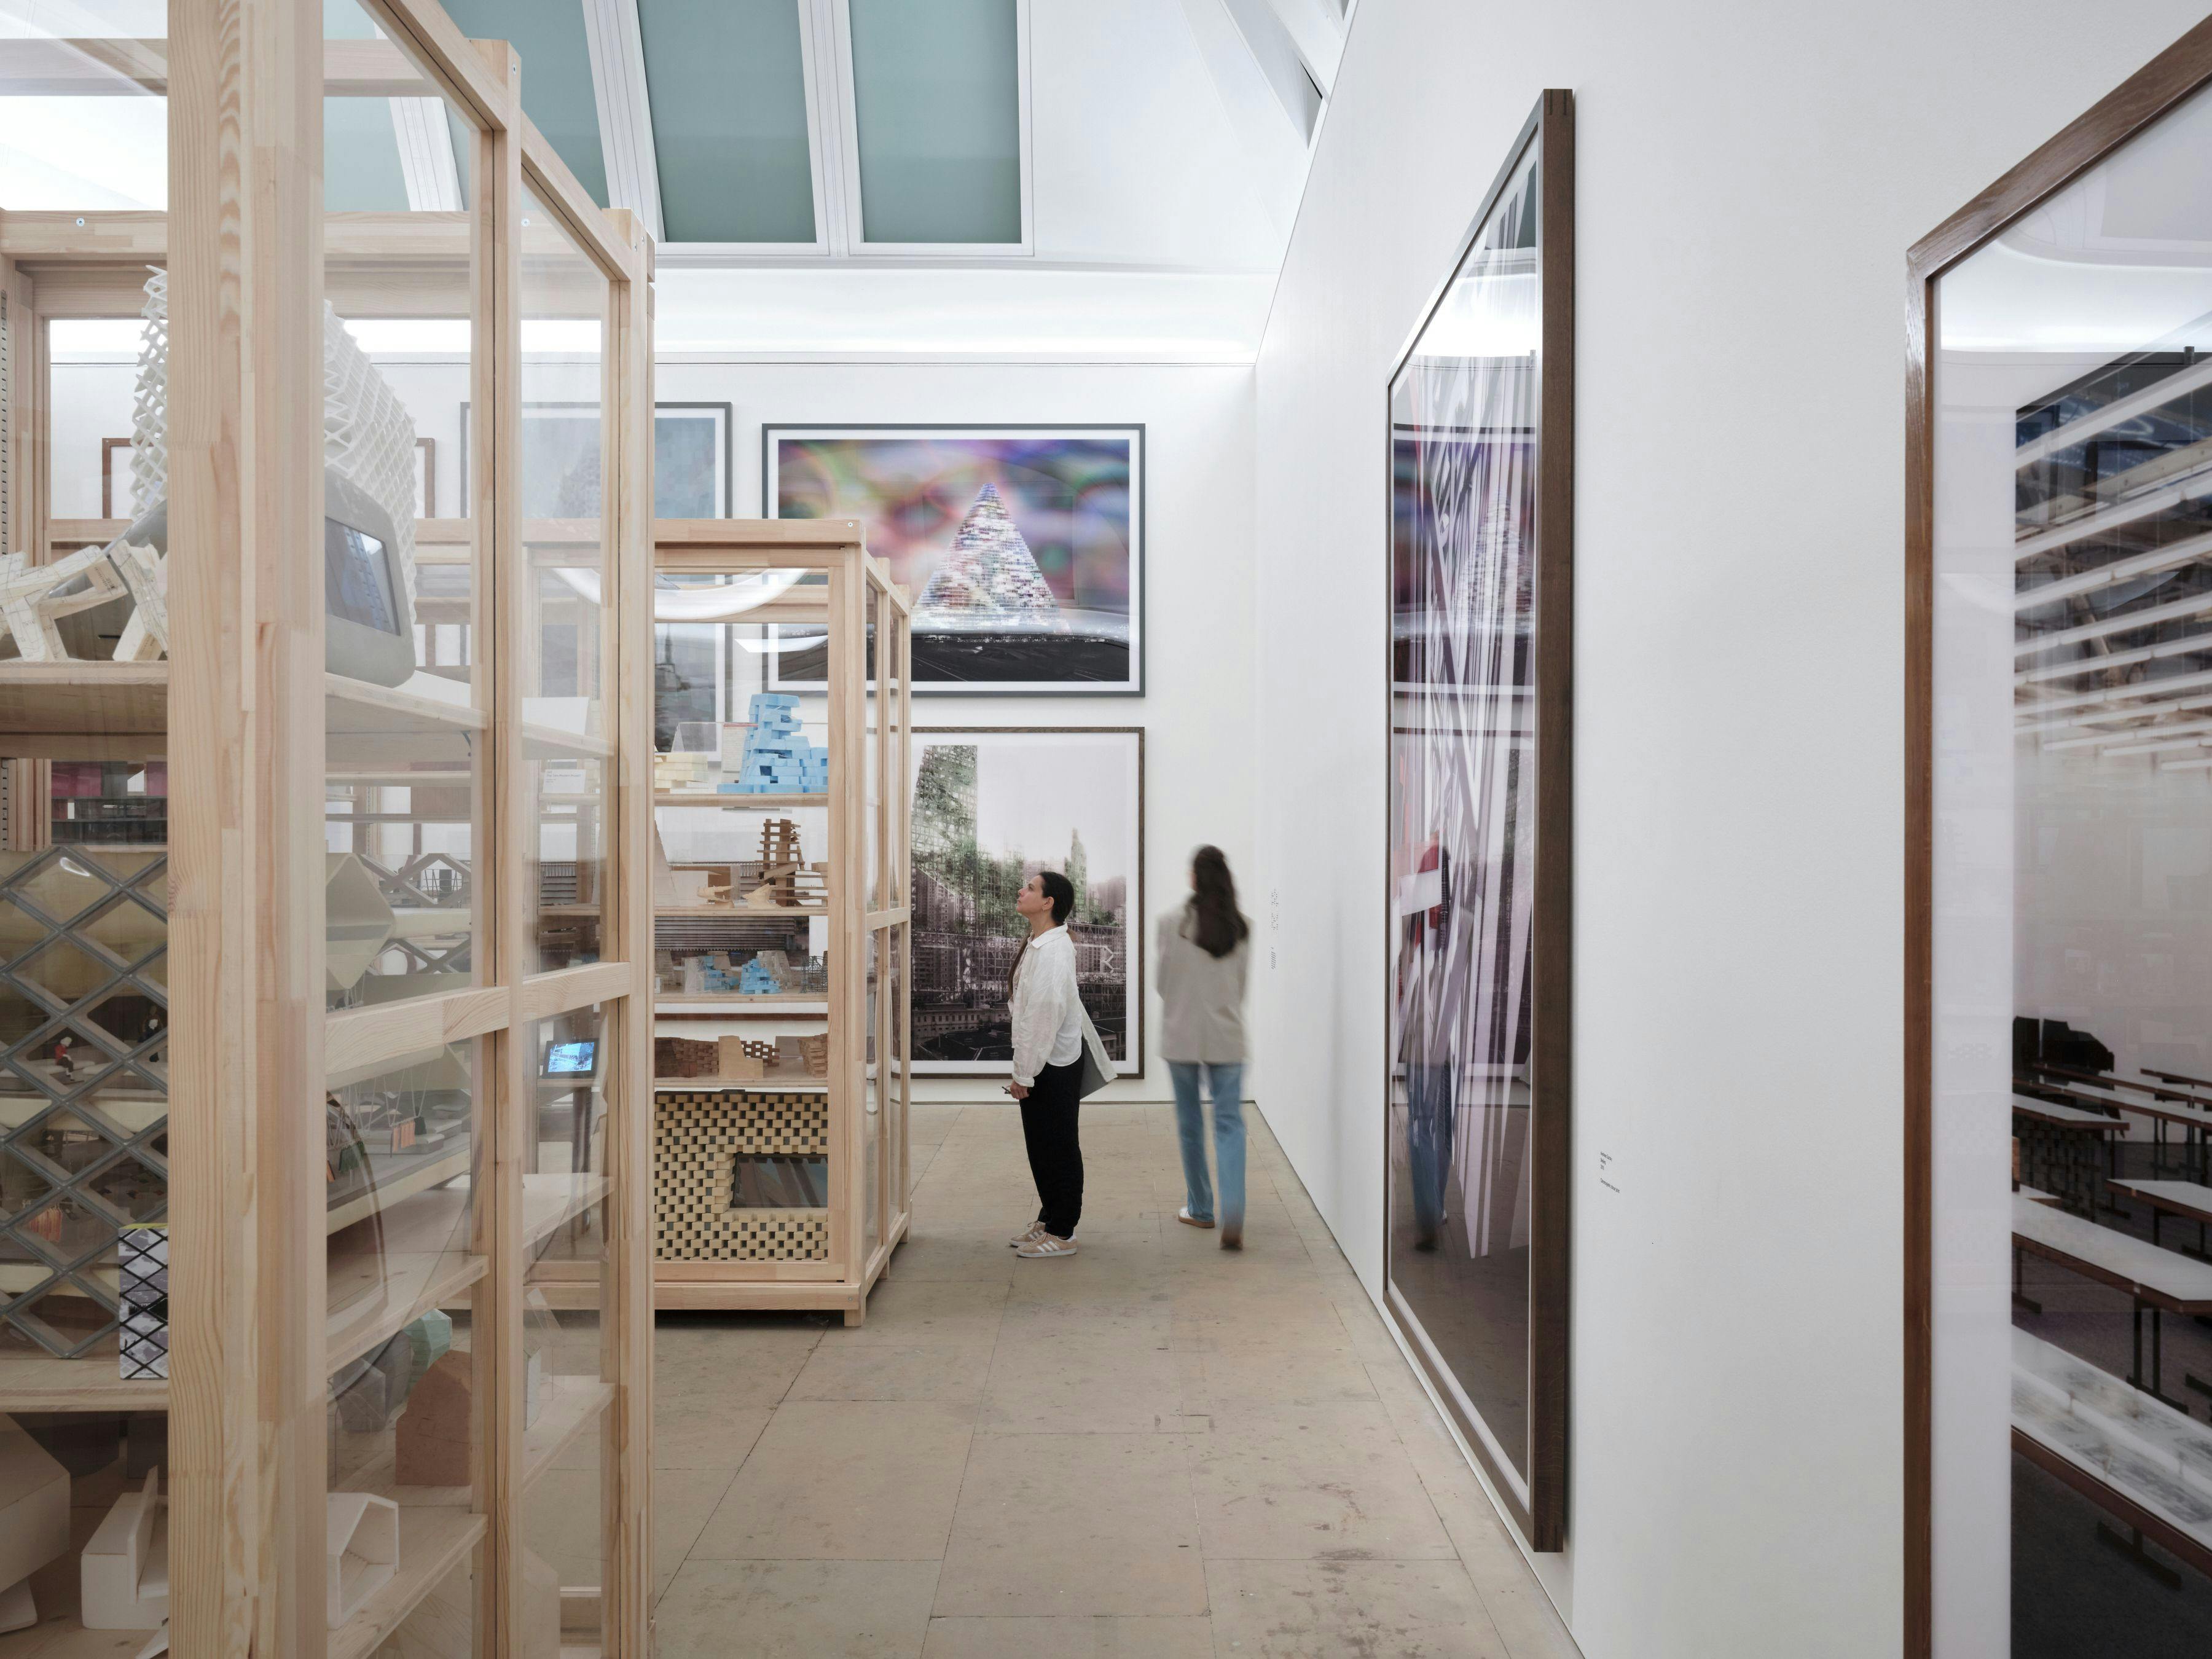 Installation view of the exhibition, Herzog & de Meuron, at the Royal Academy in London, dated 2023.